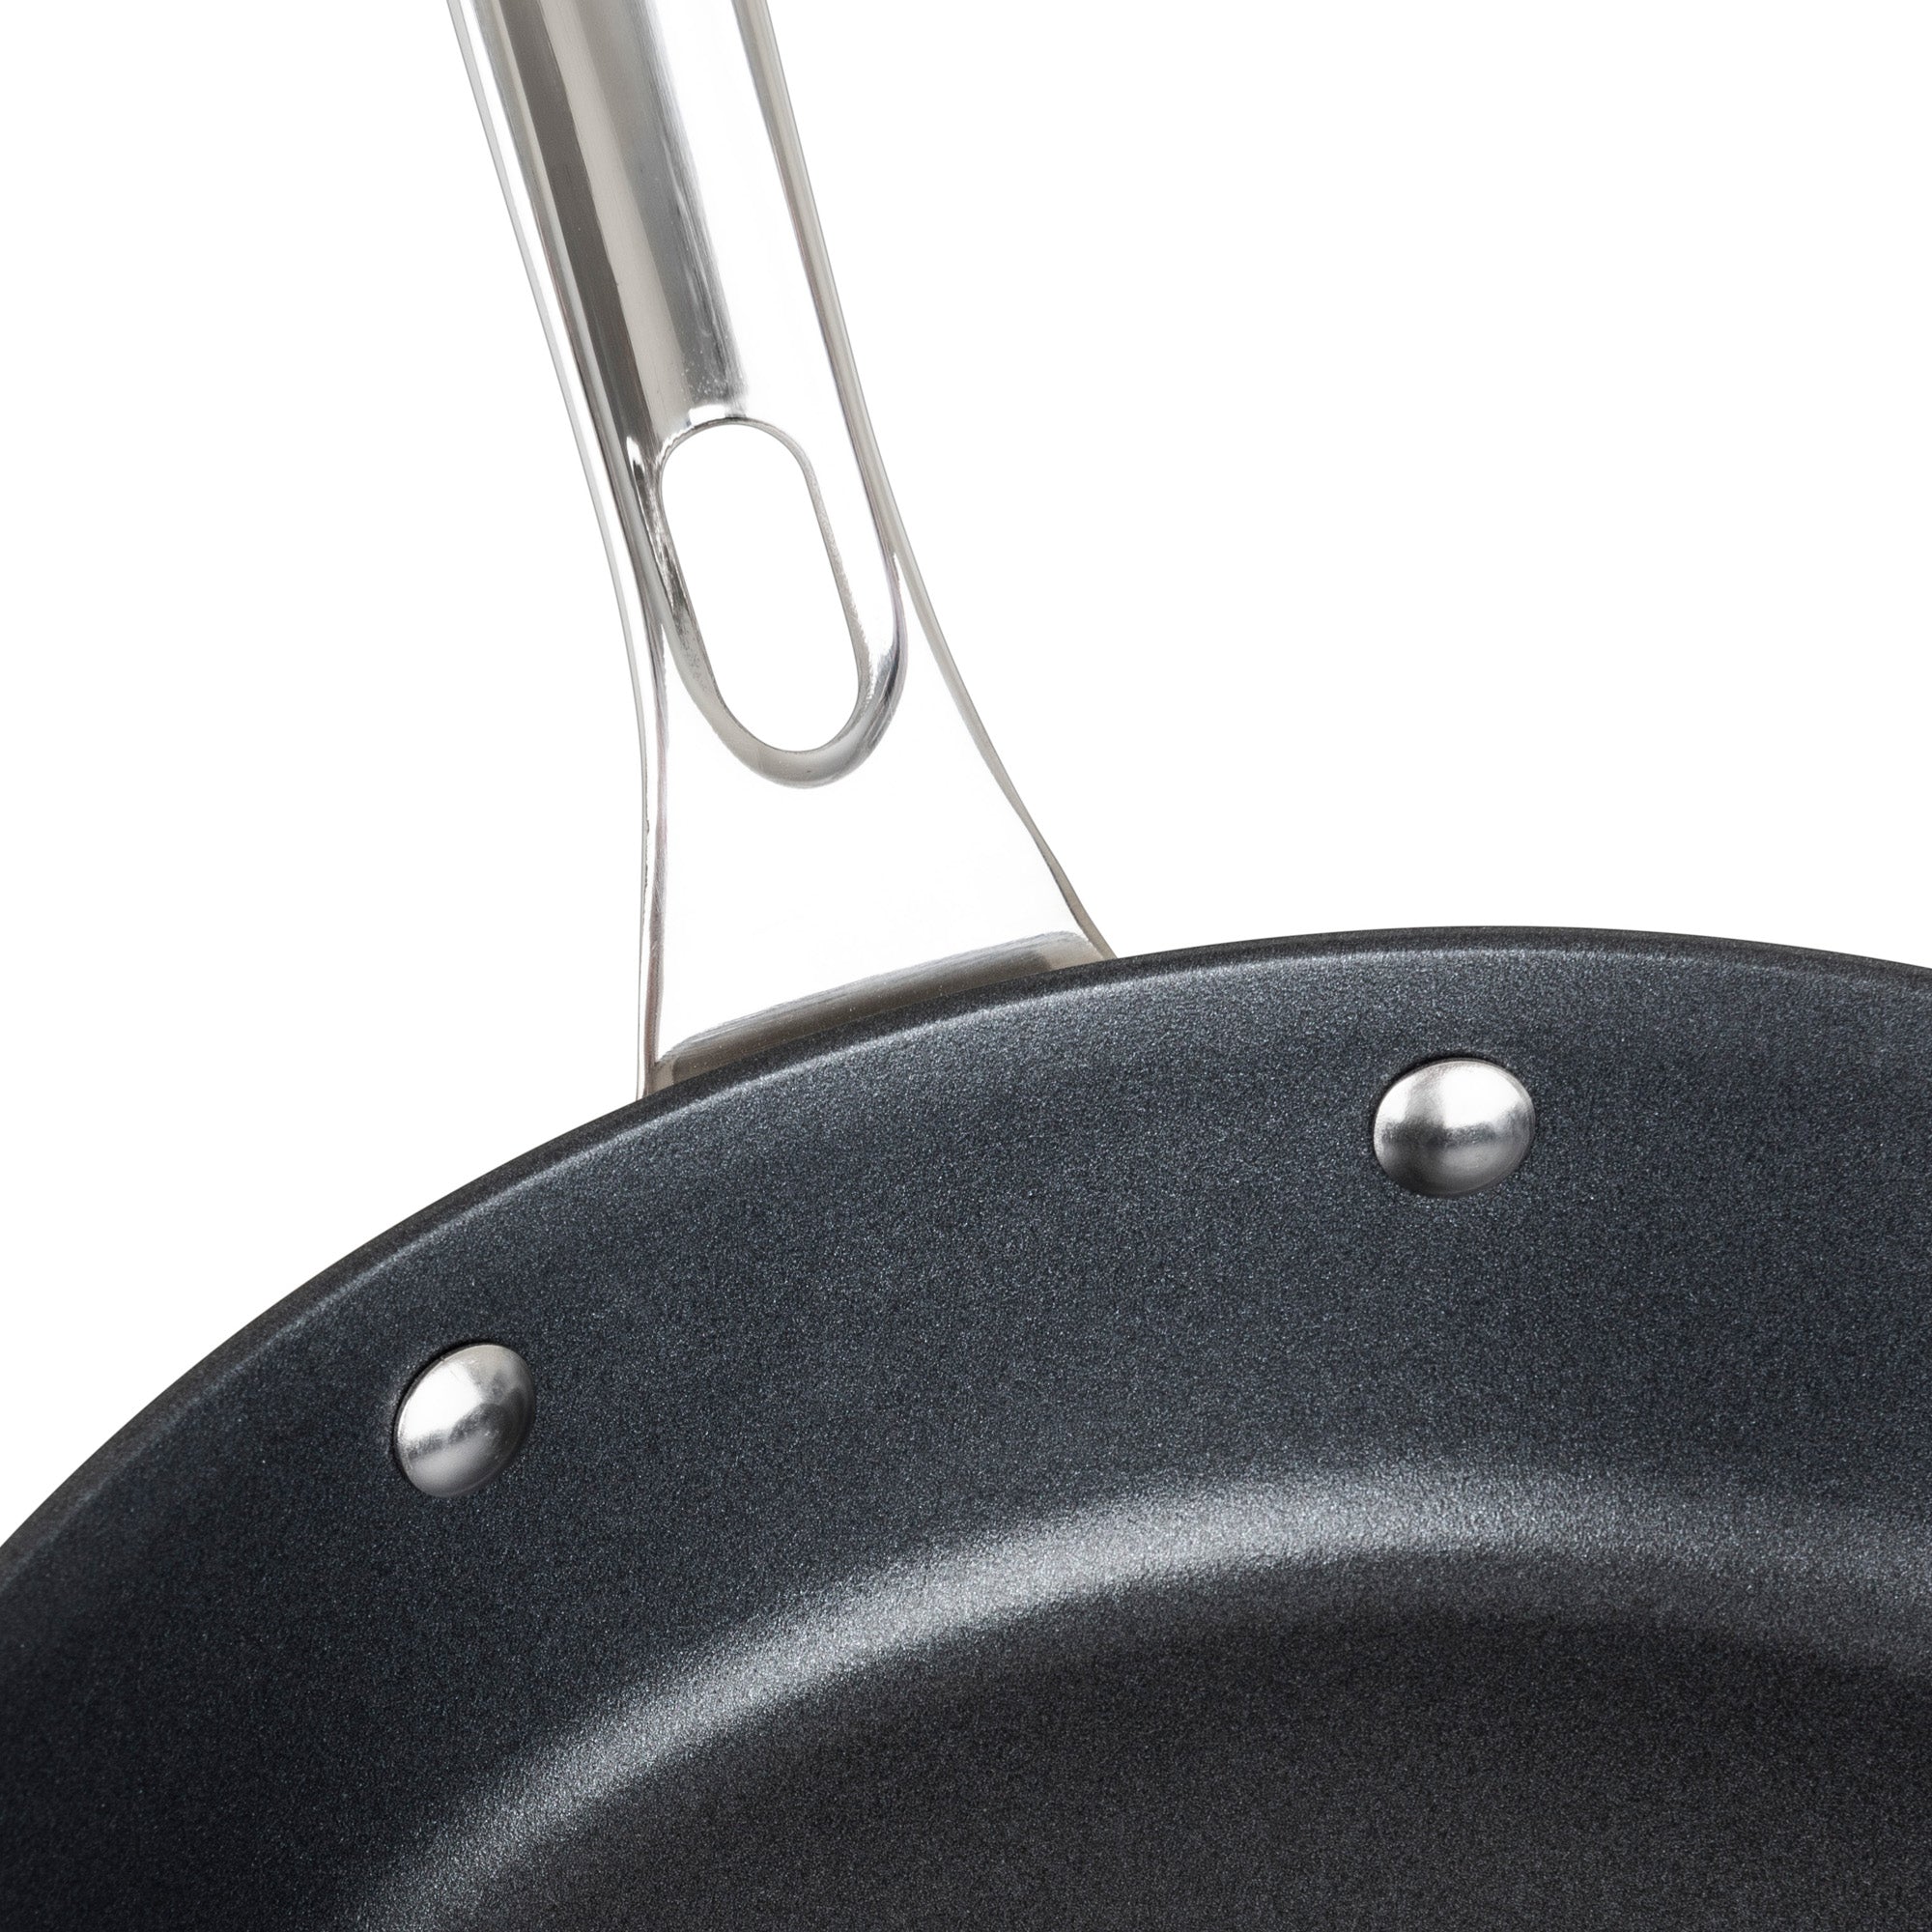 Viking Contemporary 3-Ply Stainless Steel 10-Inch Nonstick Fry Pan – Viking  Culinary Products